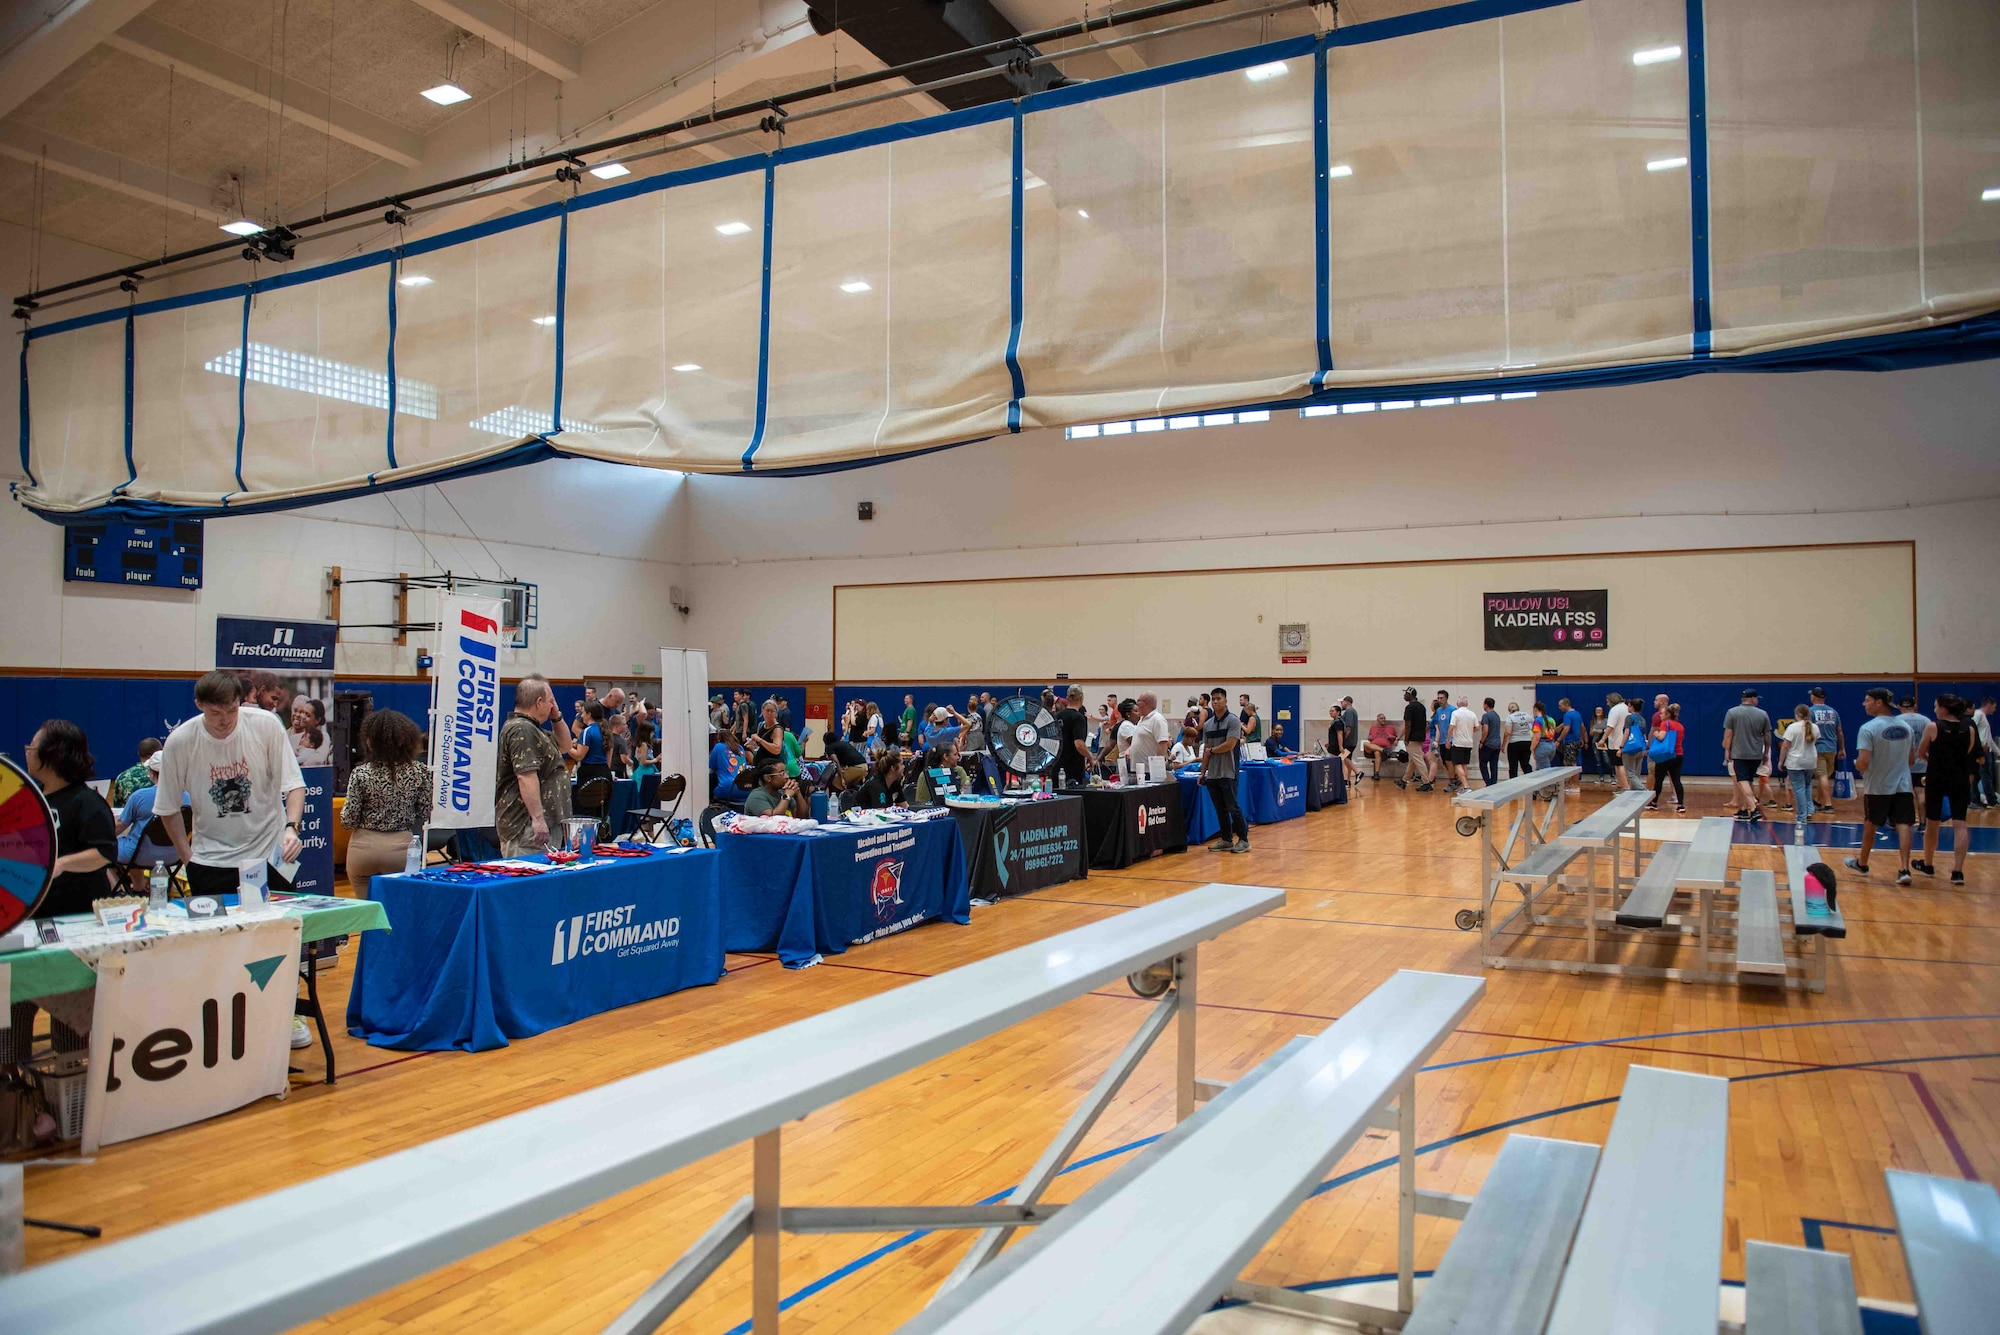 An event occurs inside of a gym with informational booths